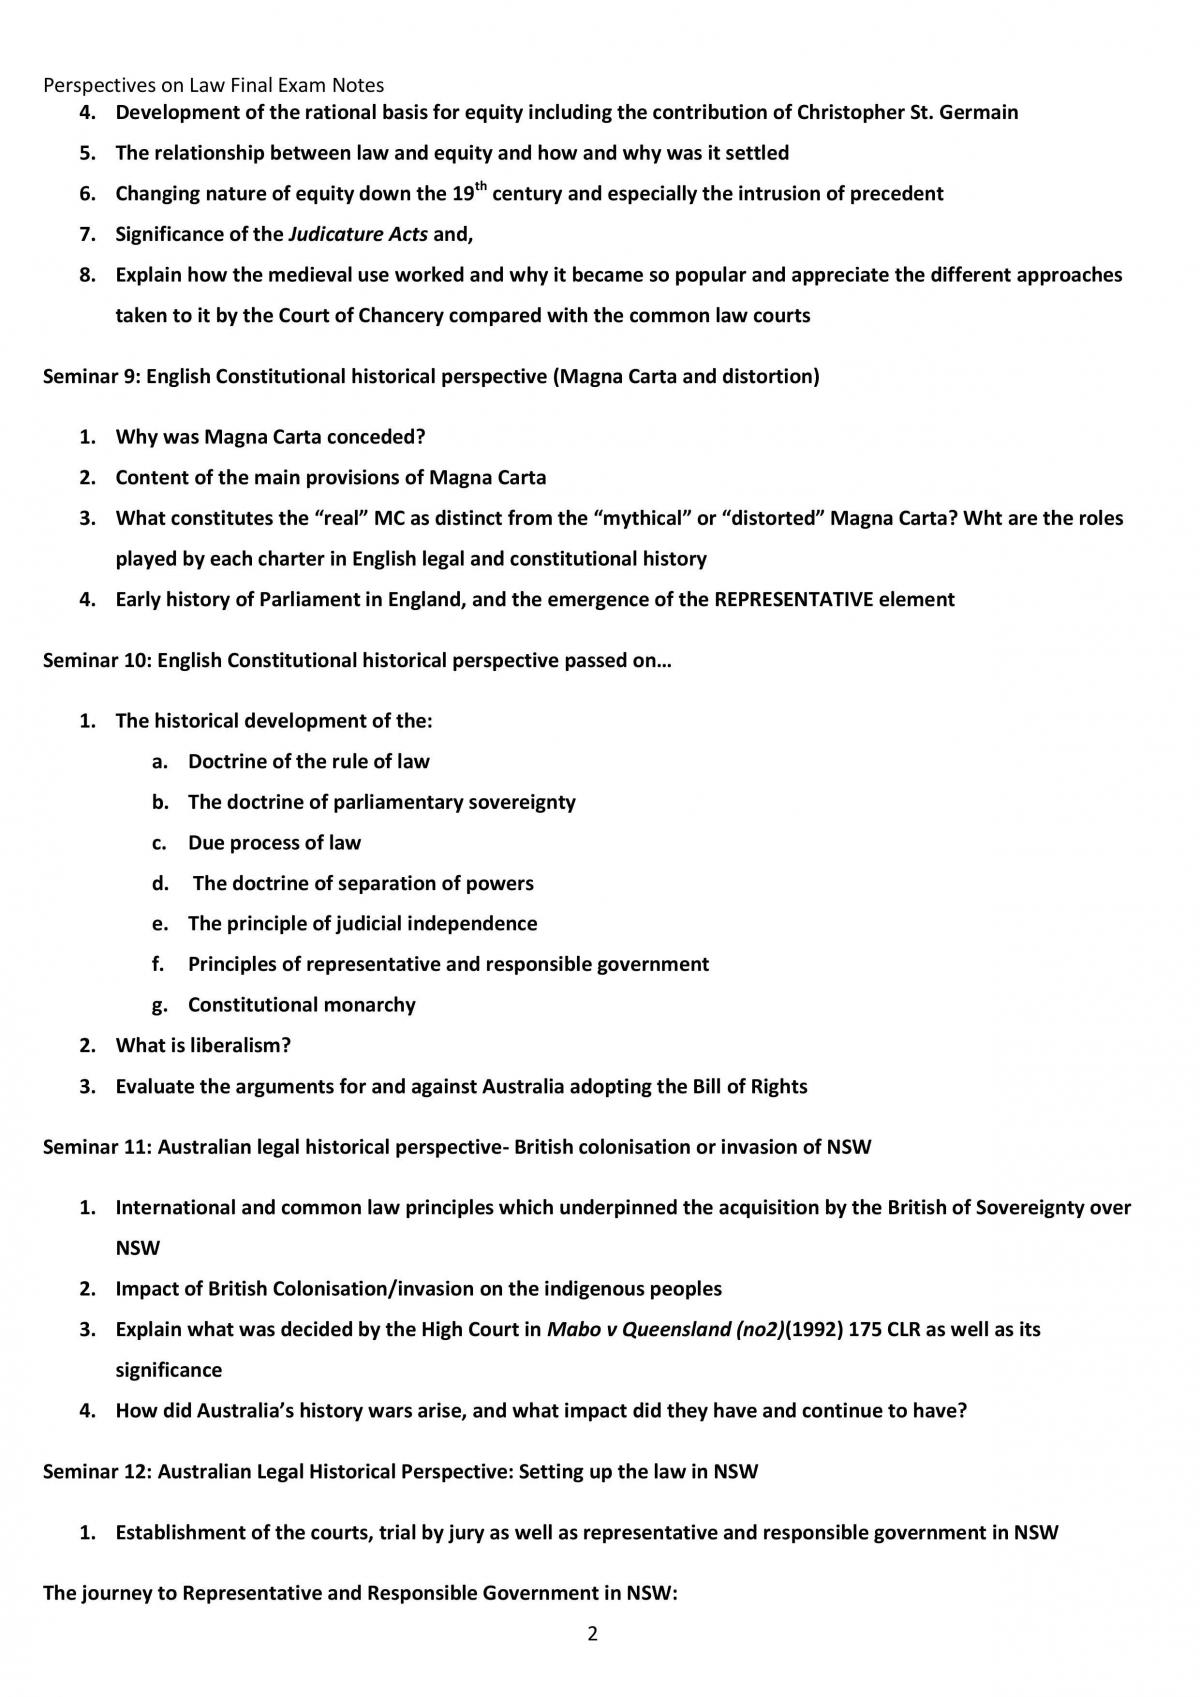 INDEPTH NOTES PERSPECTIVES ON LAW - Page 2